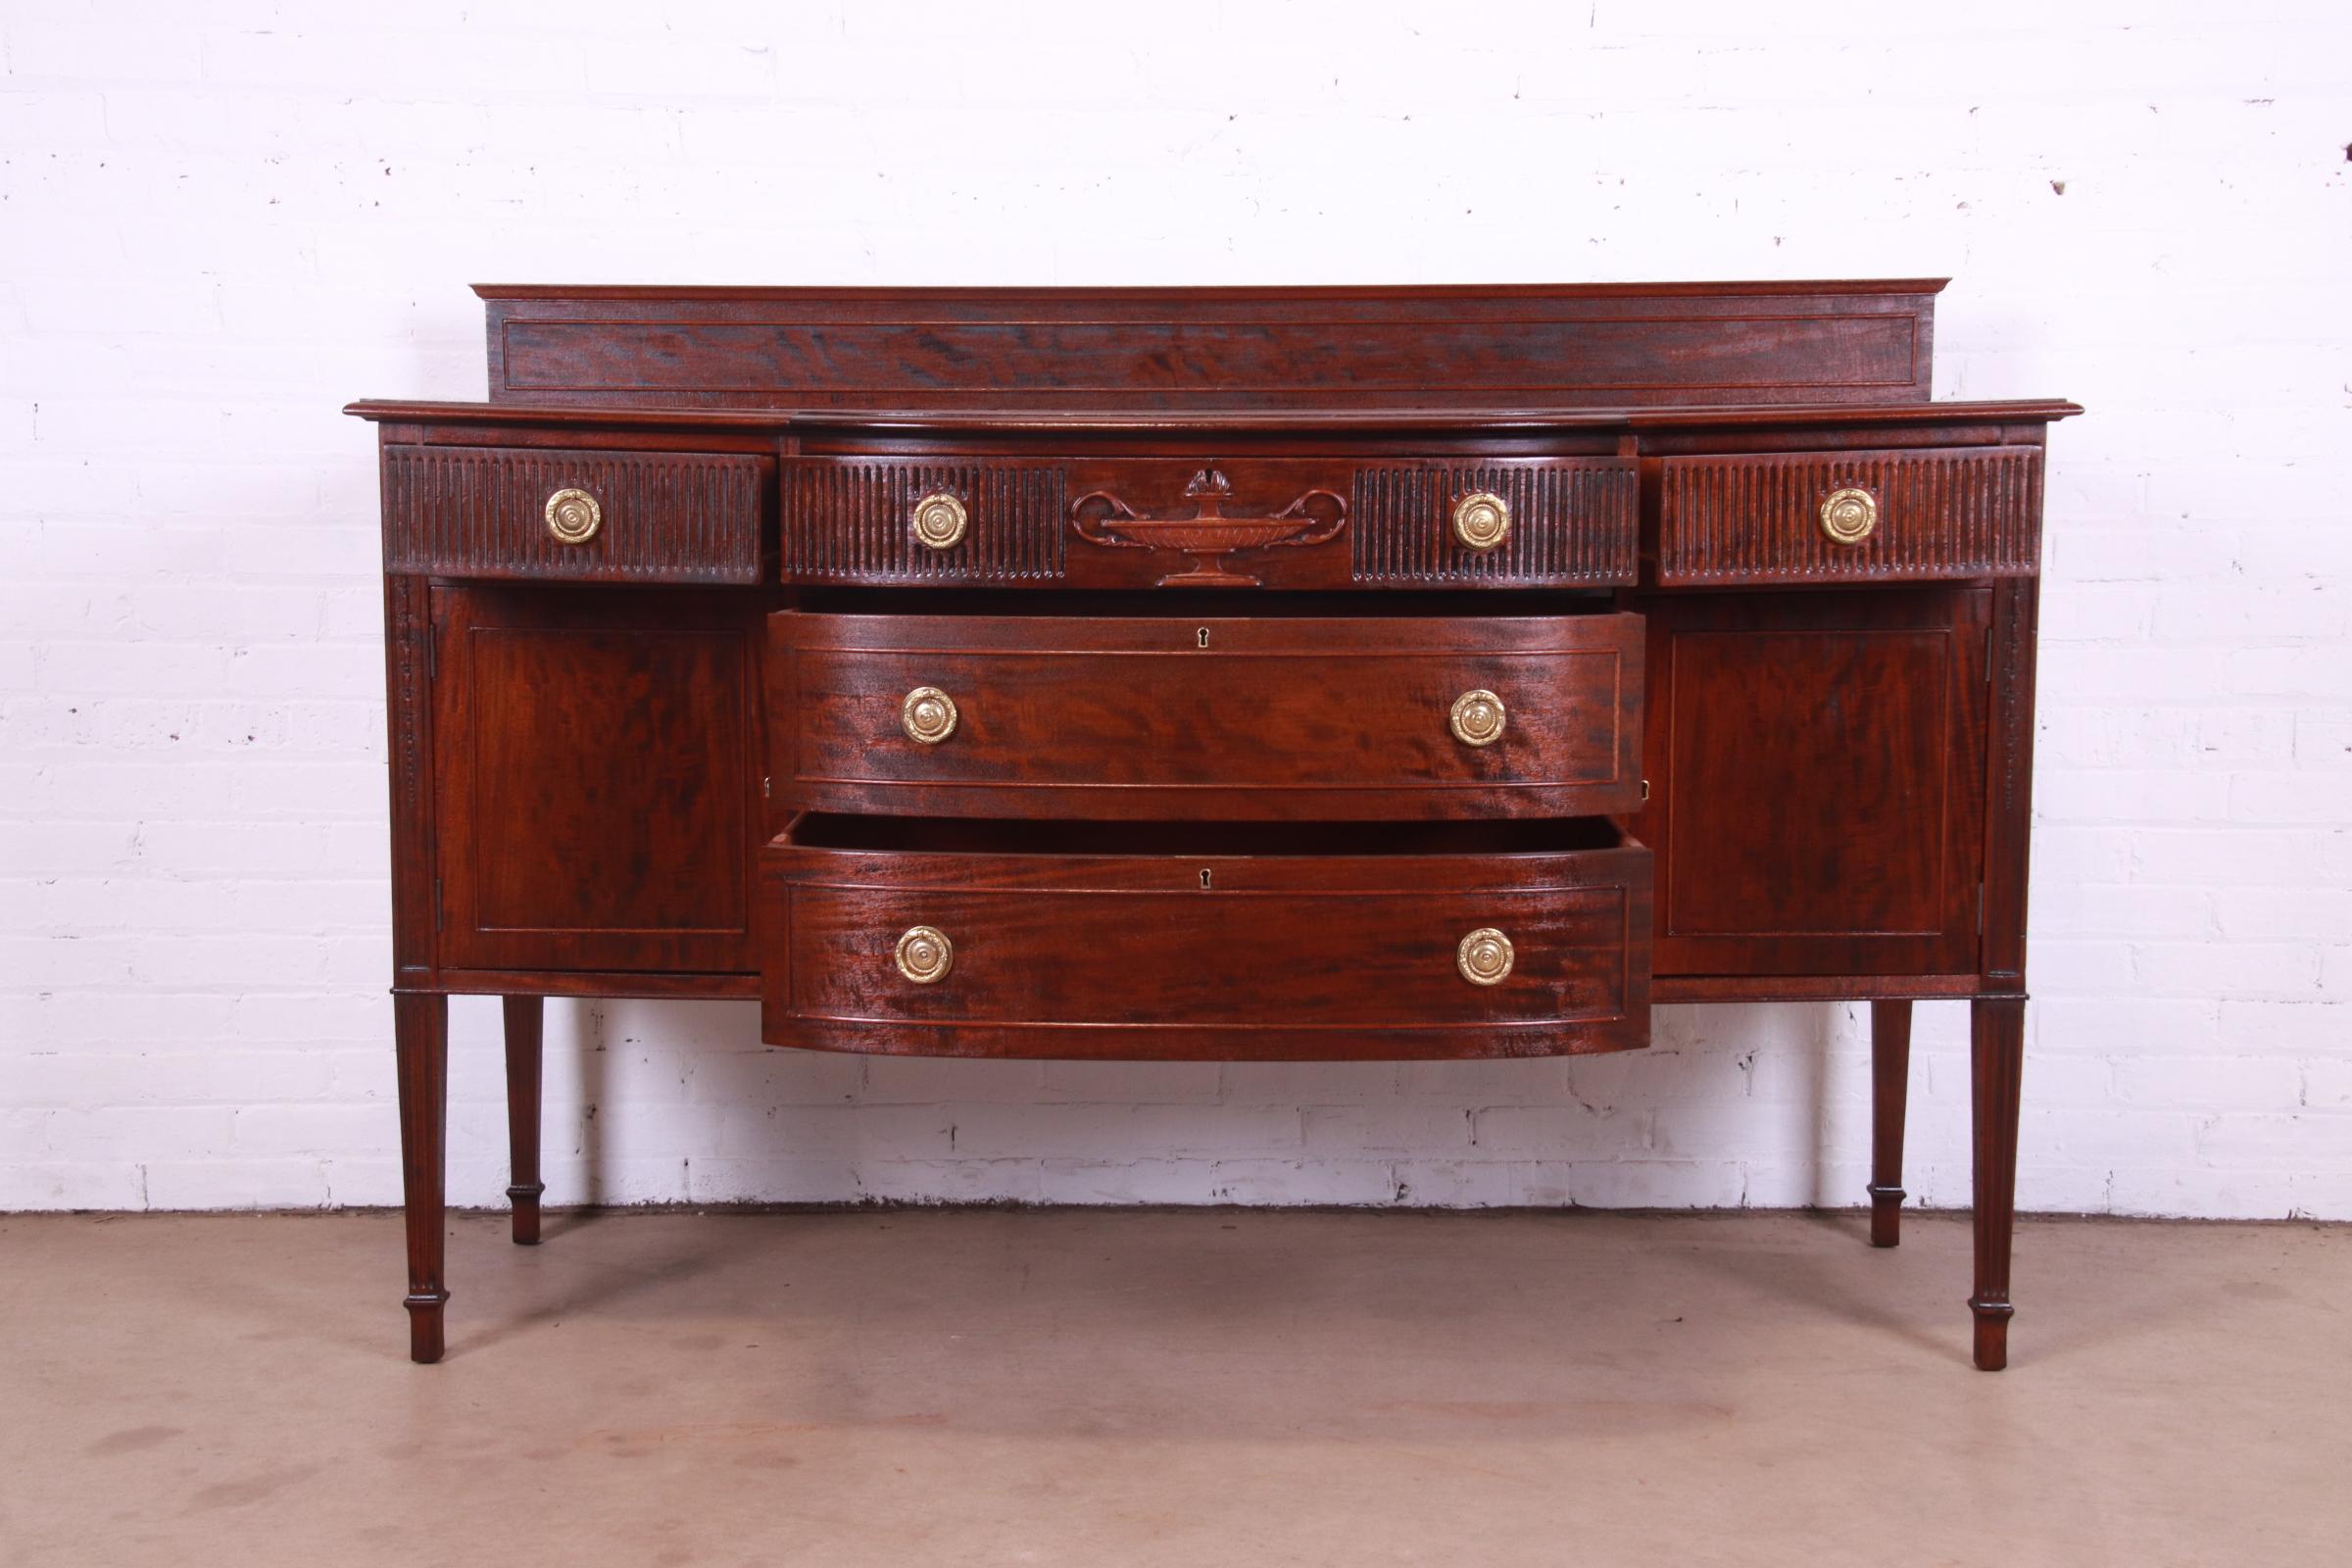 Antique French Regency Louis XVI Style Carved Mahogany Sideboard or Bar Cabinet For Sale 1